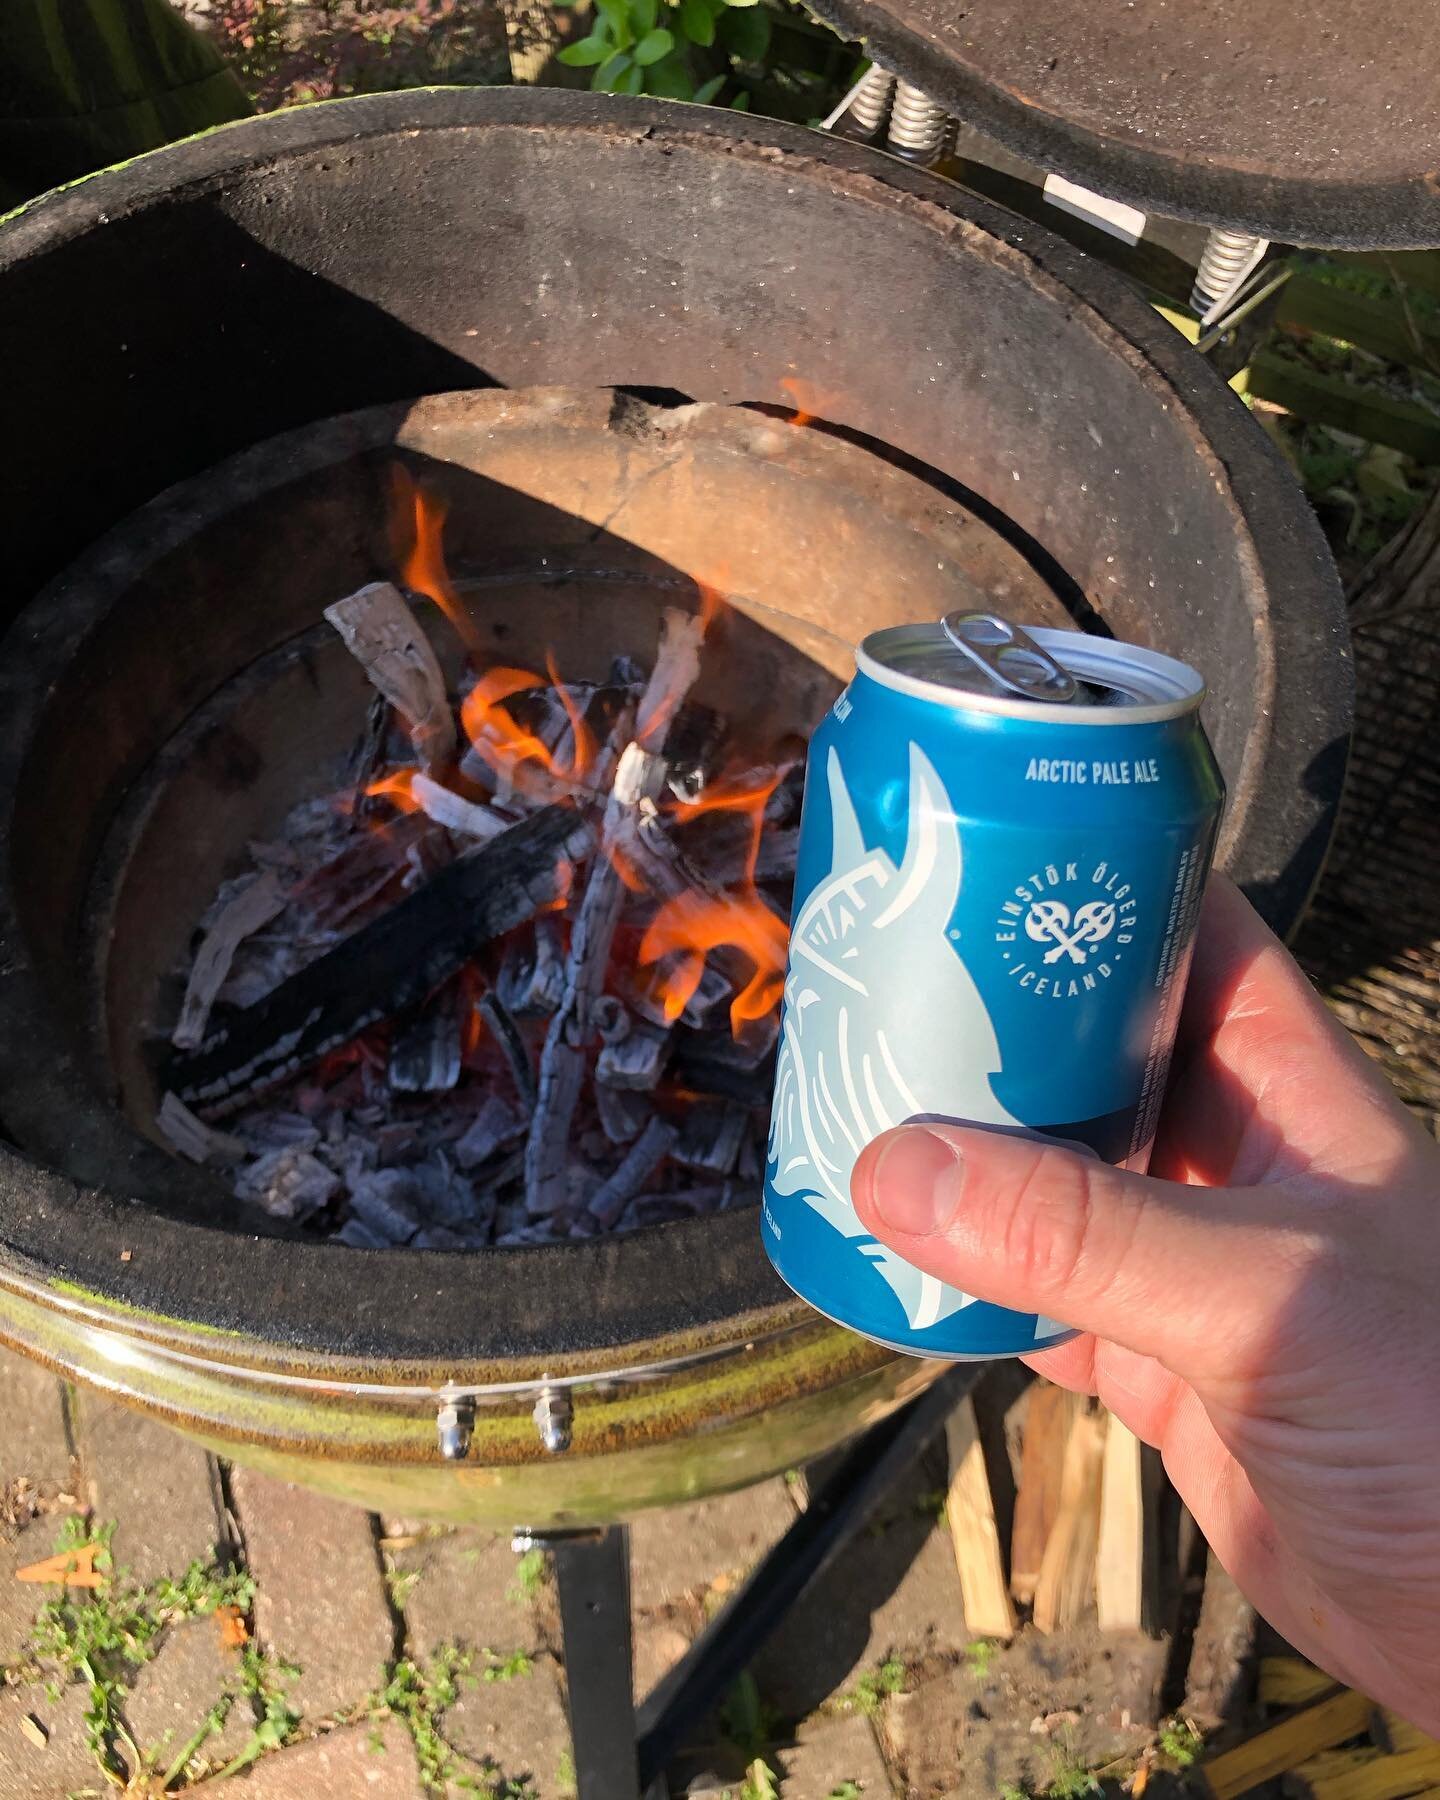 I&rsquo;ve been head down since the beginning of this year. It&rsquo;s been a grind, in the shop and at the house prepping for a kiddo. Today, the weather is beautiful and my day is done. Pizza over the fire and Viking beer. Cheers 🍻